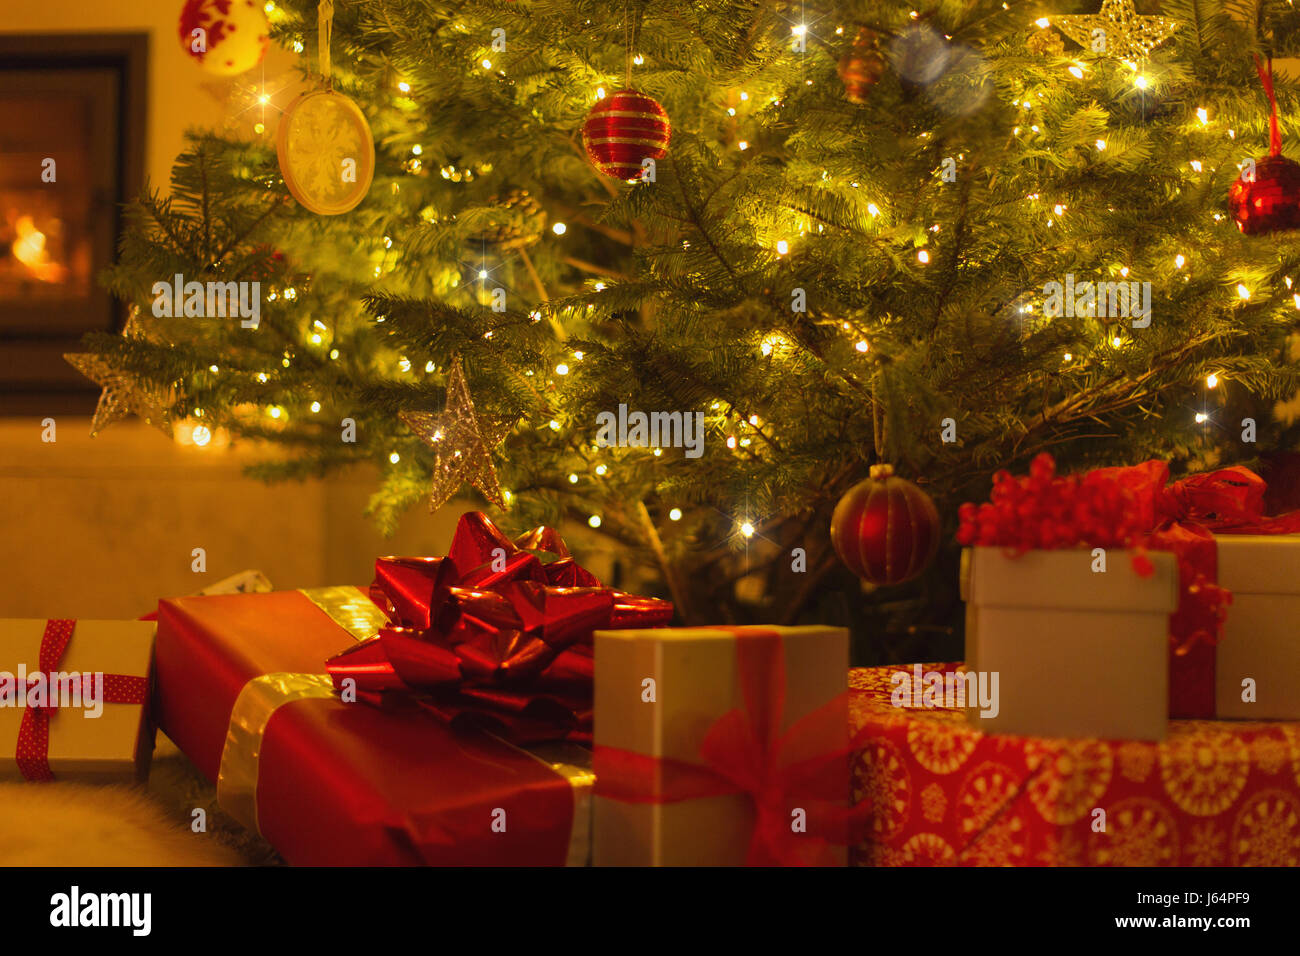 Gifts with red bows under illuminated Christmas tree Stock Photo